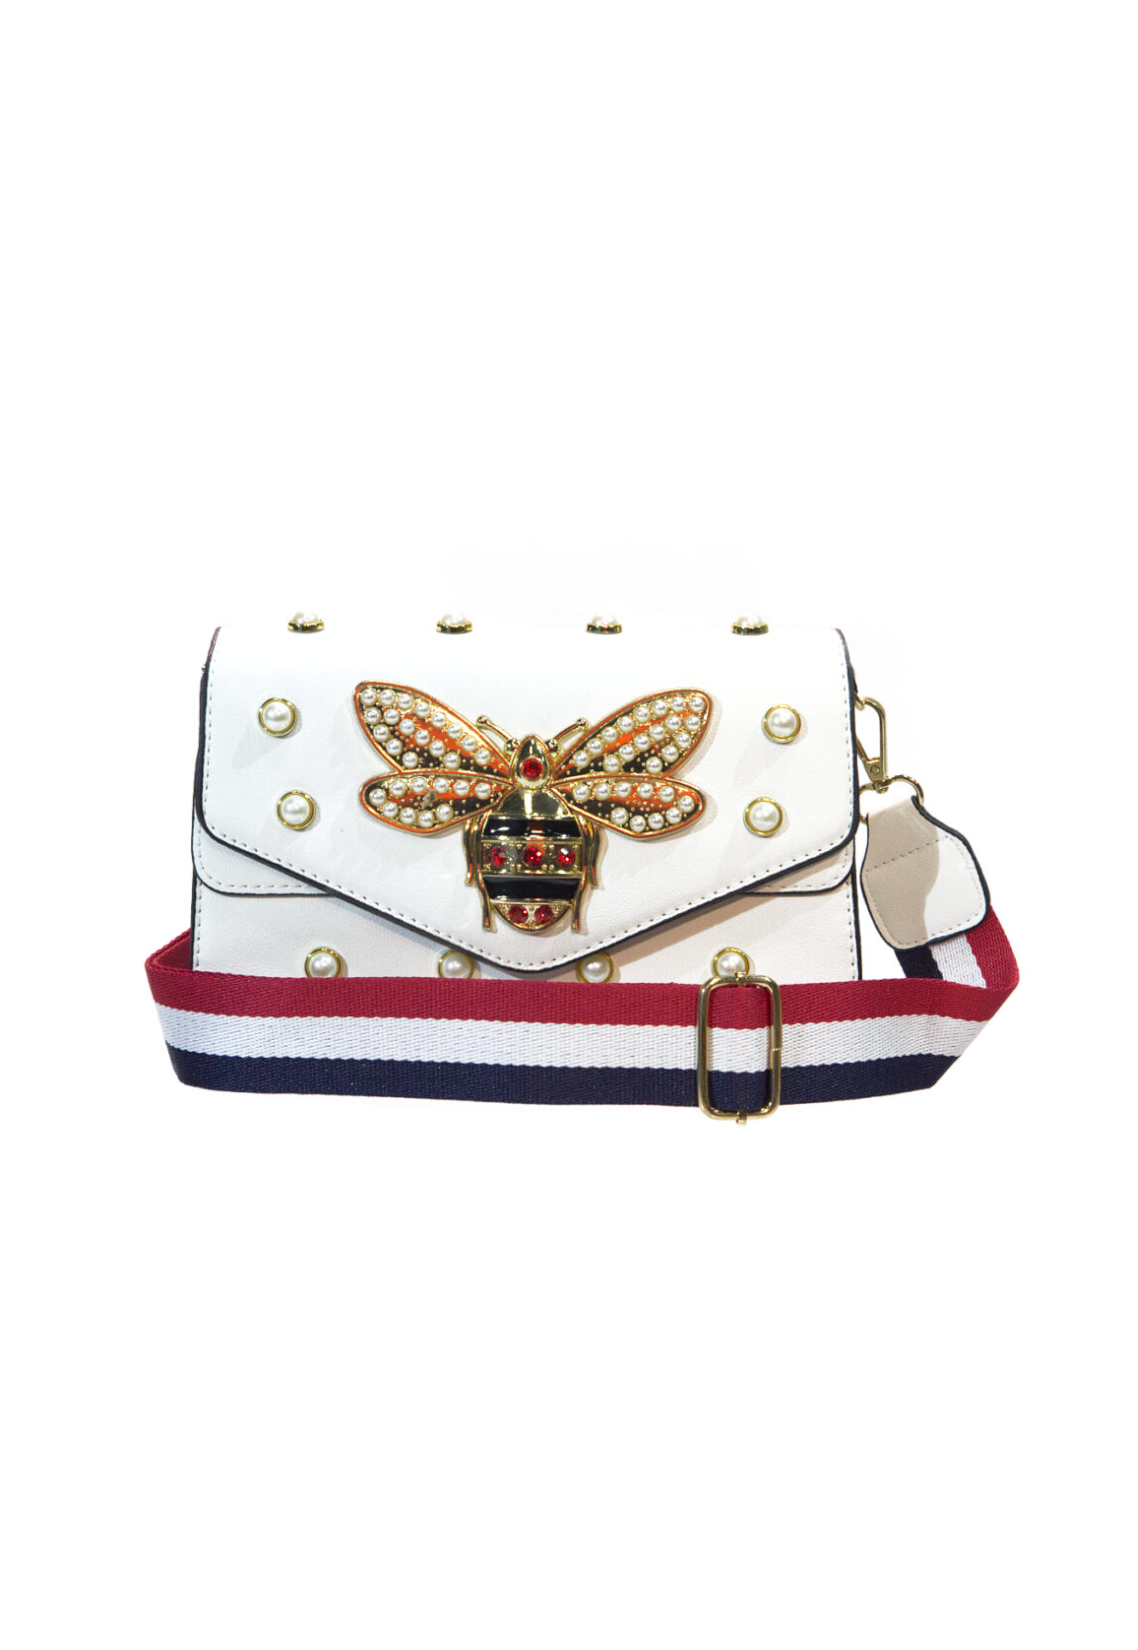 Handbags & Purses by GALXBOY - View Our Range & Shop Online Here